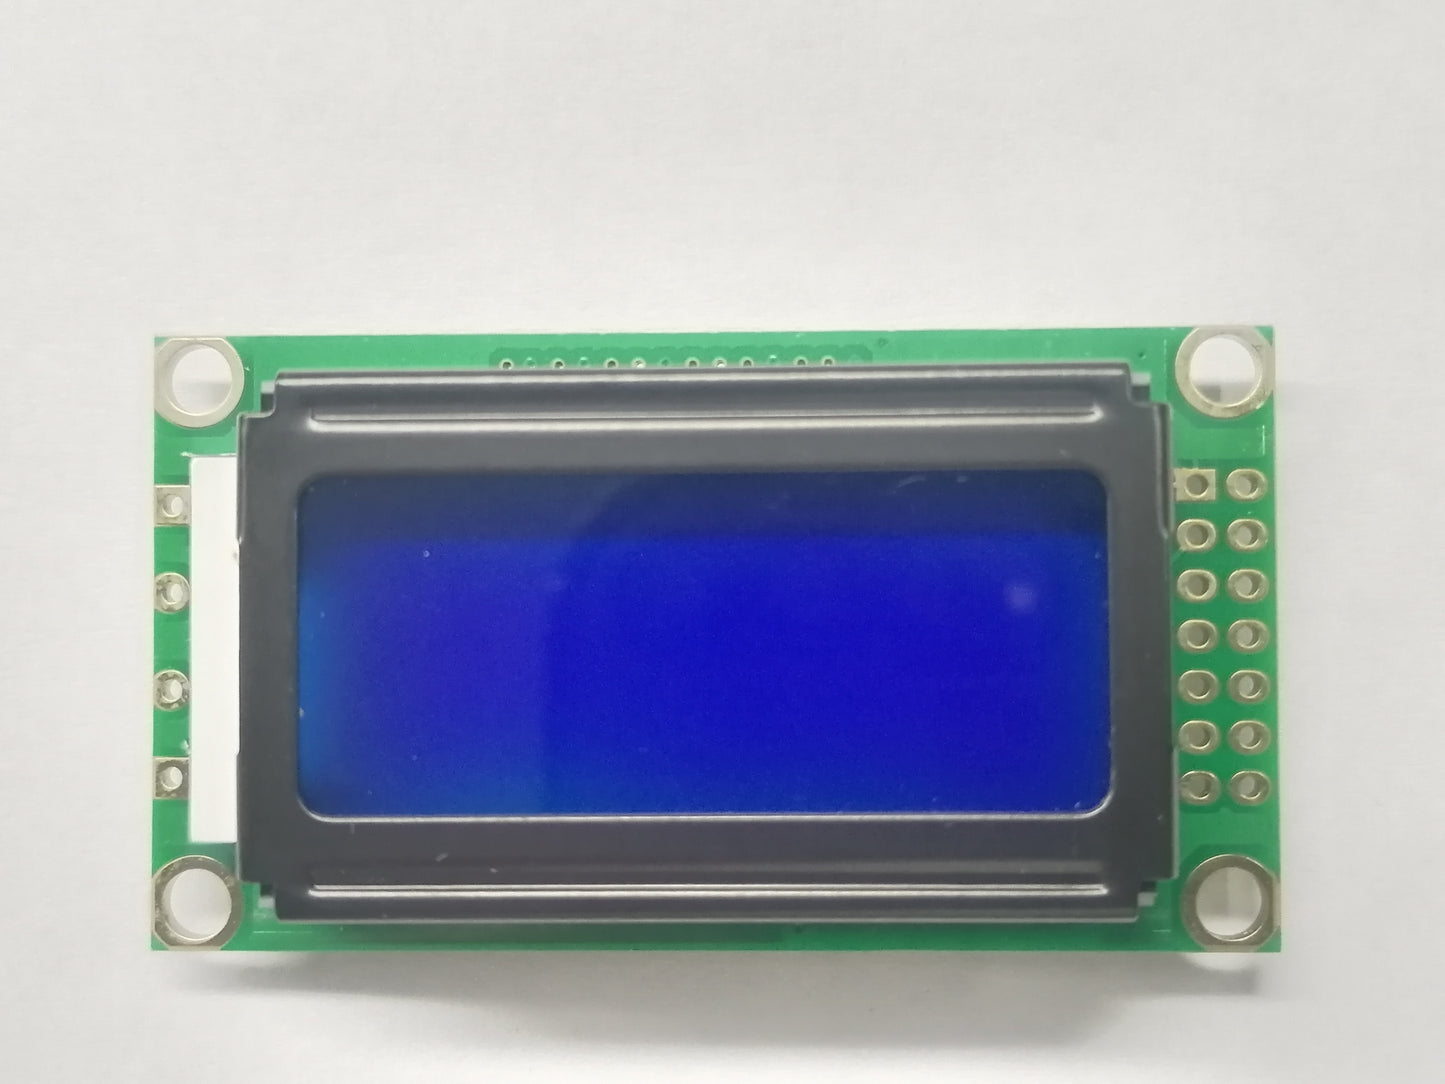 8x2 Character LCD Display Module (RD0802A)